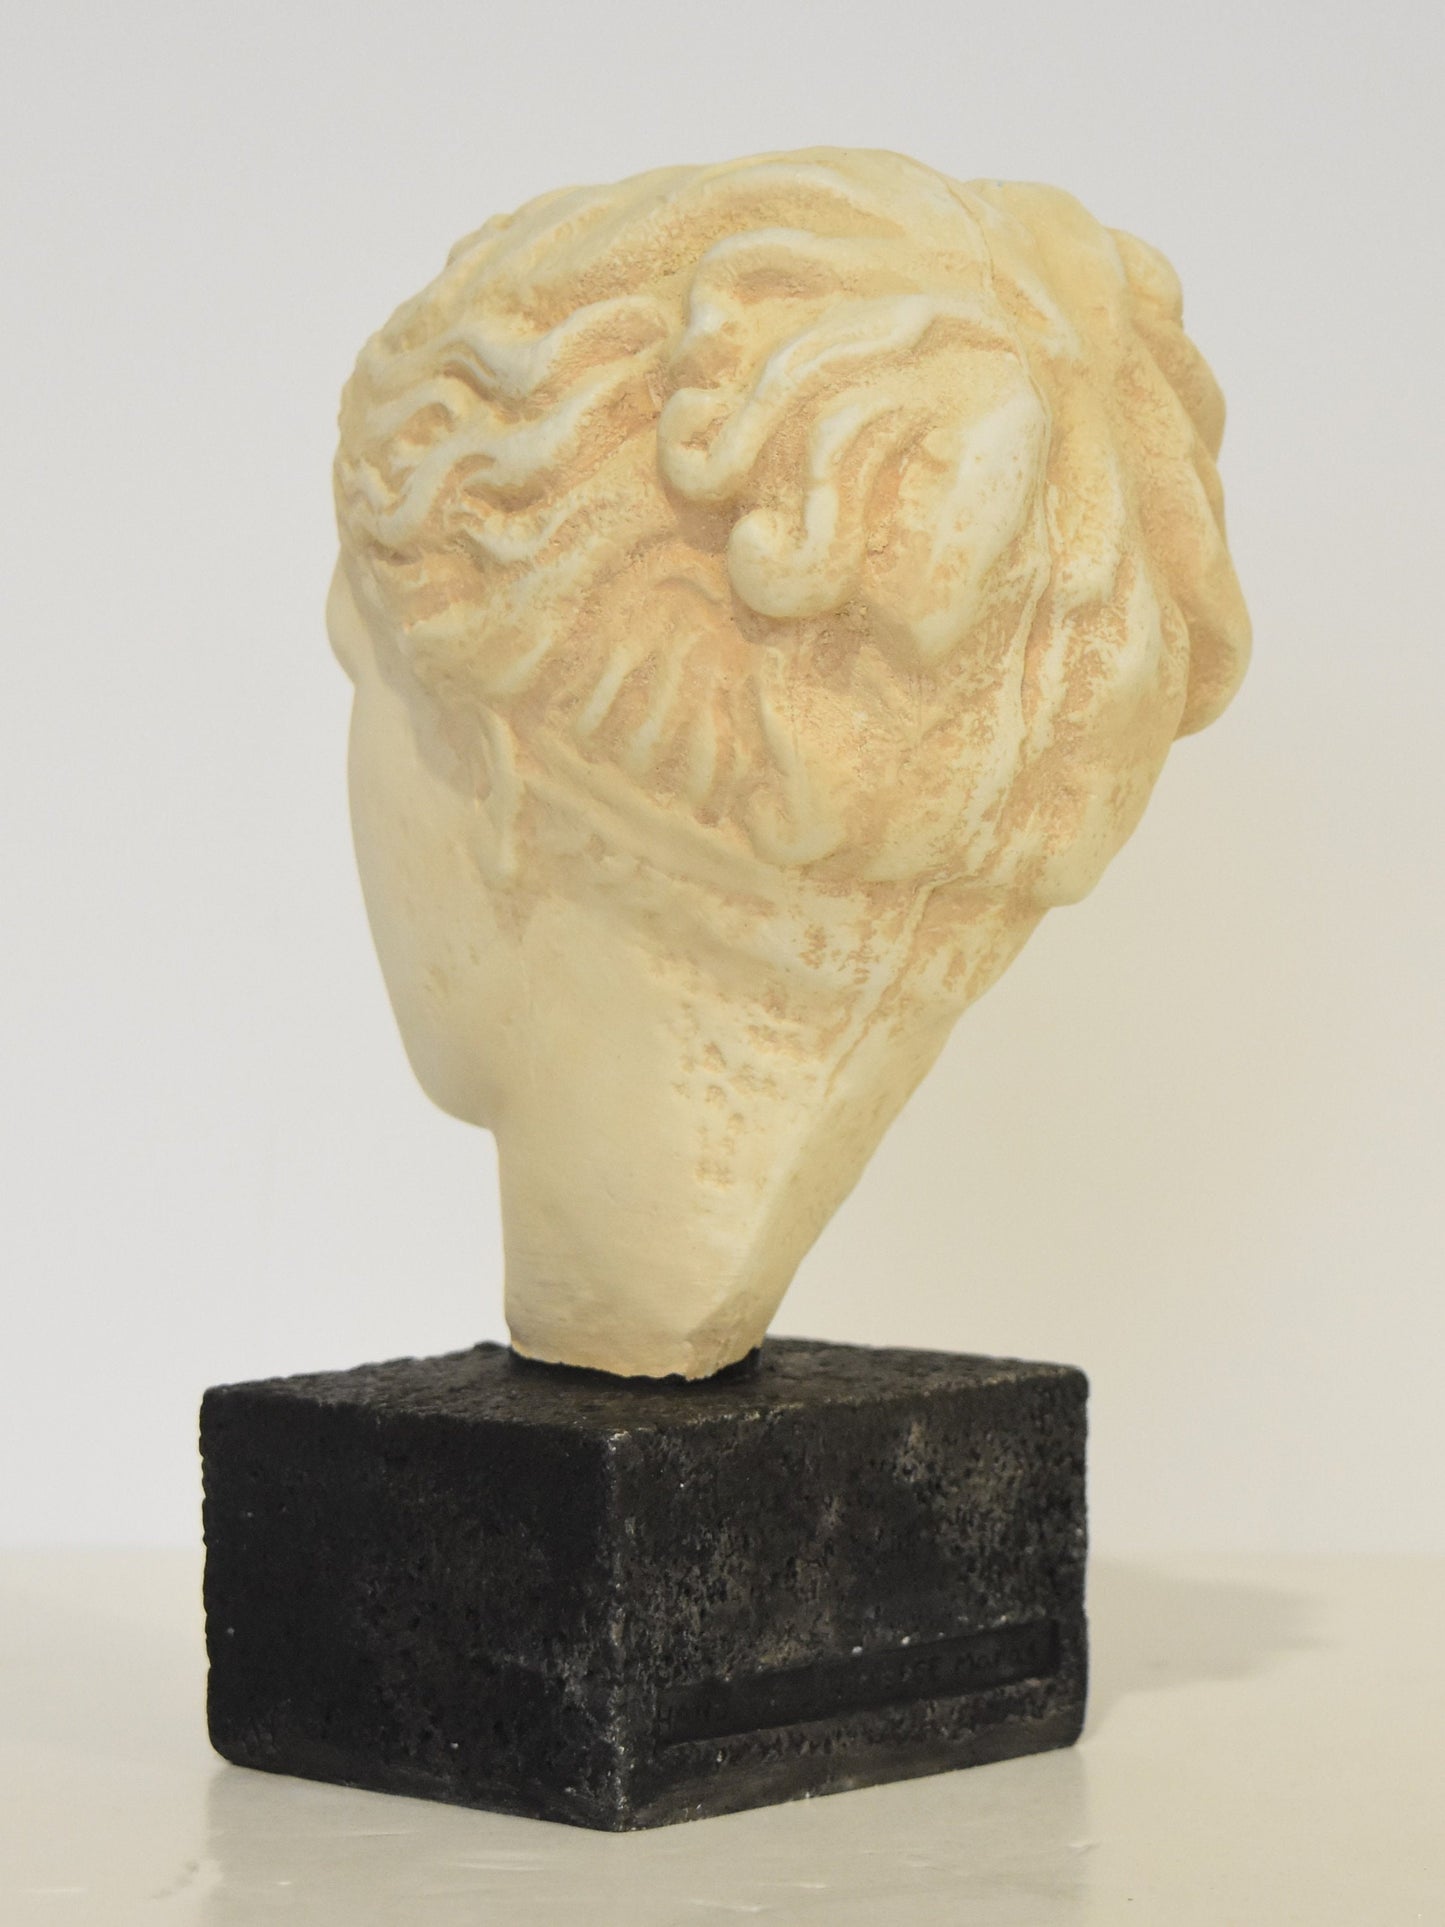 Hygieia - Greek Goddess of Health, Cleanliness and Hygiene - Museum Reproduction - Head Bust - Casting Stone